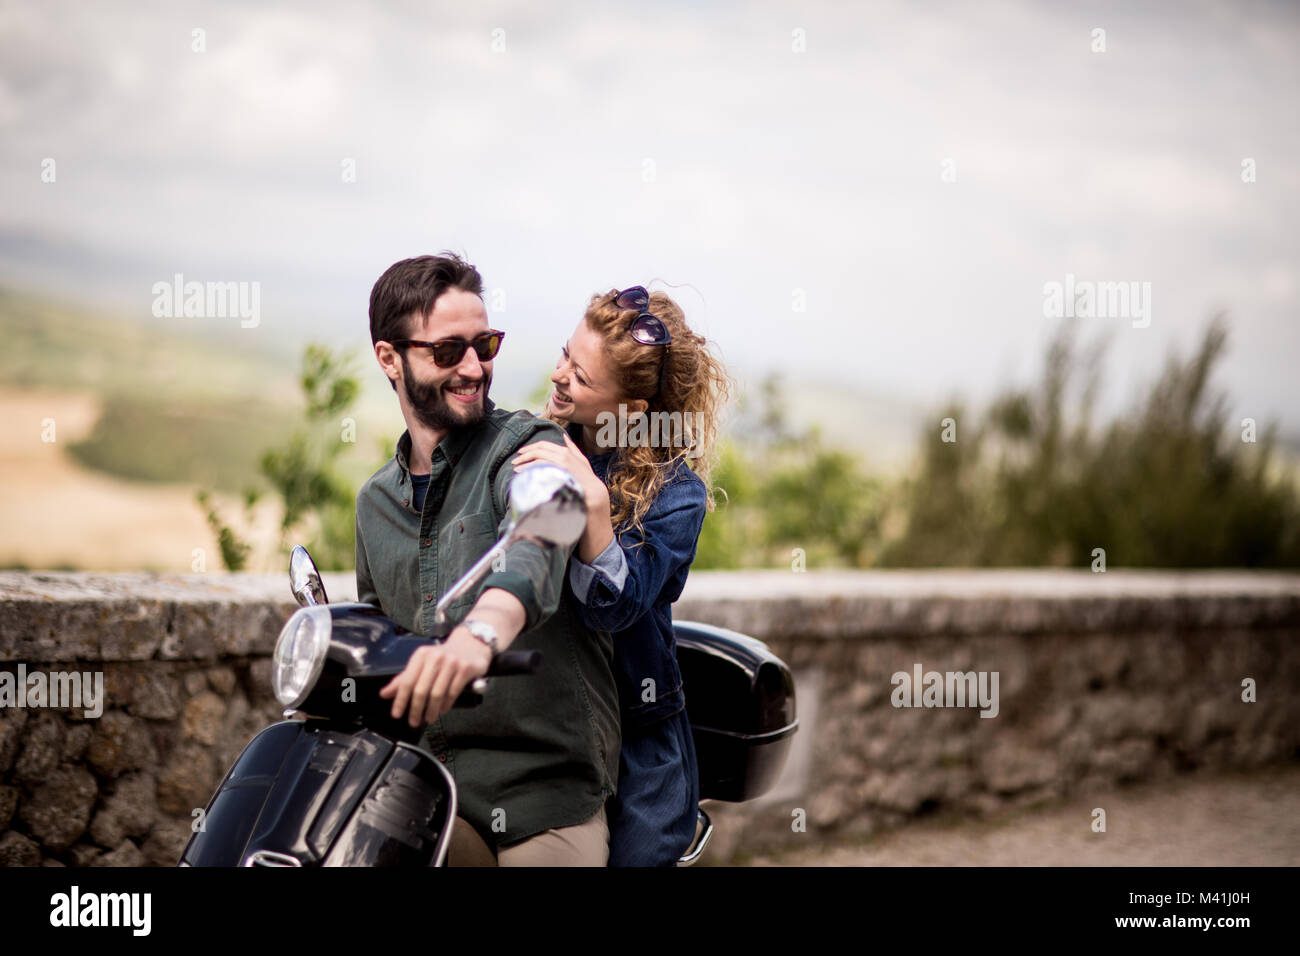 Young couple on motorbike together about to ride off Stock Photo